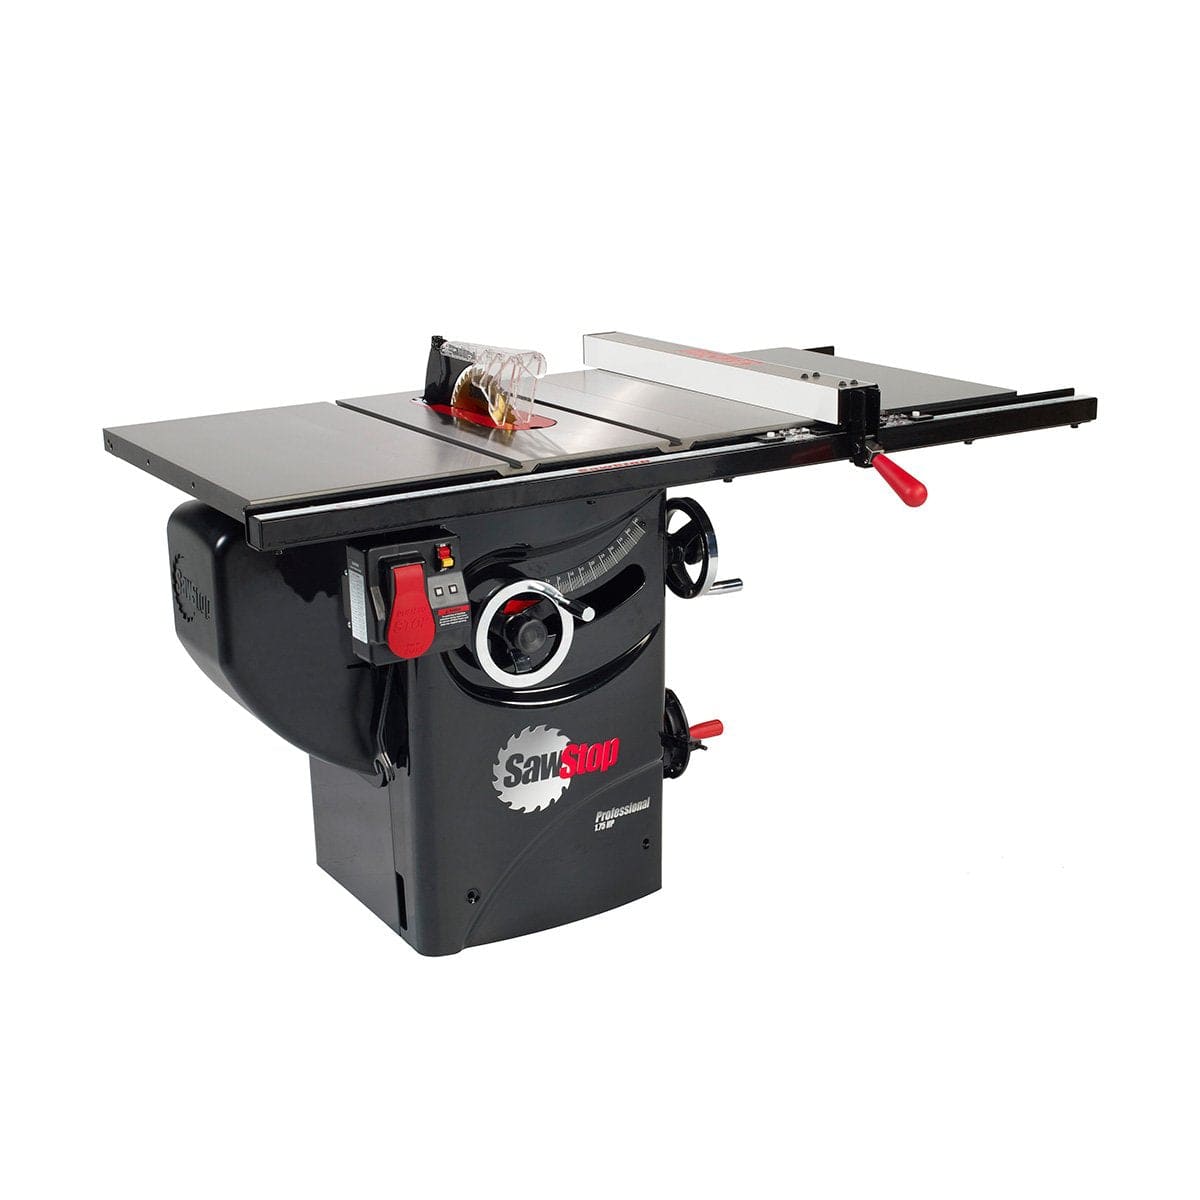 SawStop PCS175-PFA30 Table Saw 10" Professional Cabinet Saw 30" Fence 1.75HP 1-Phase